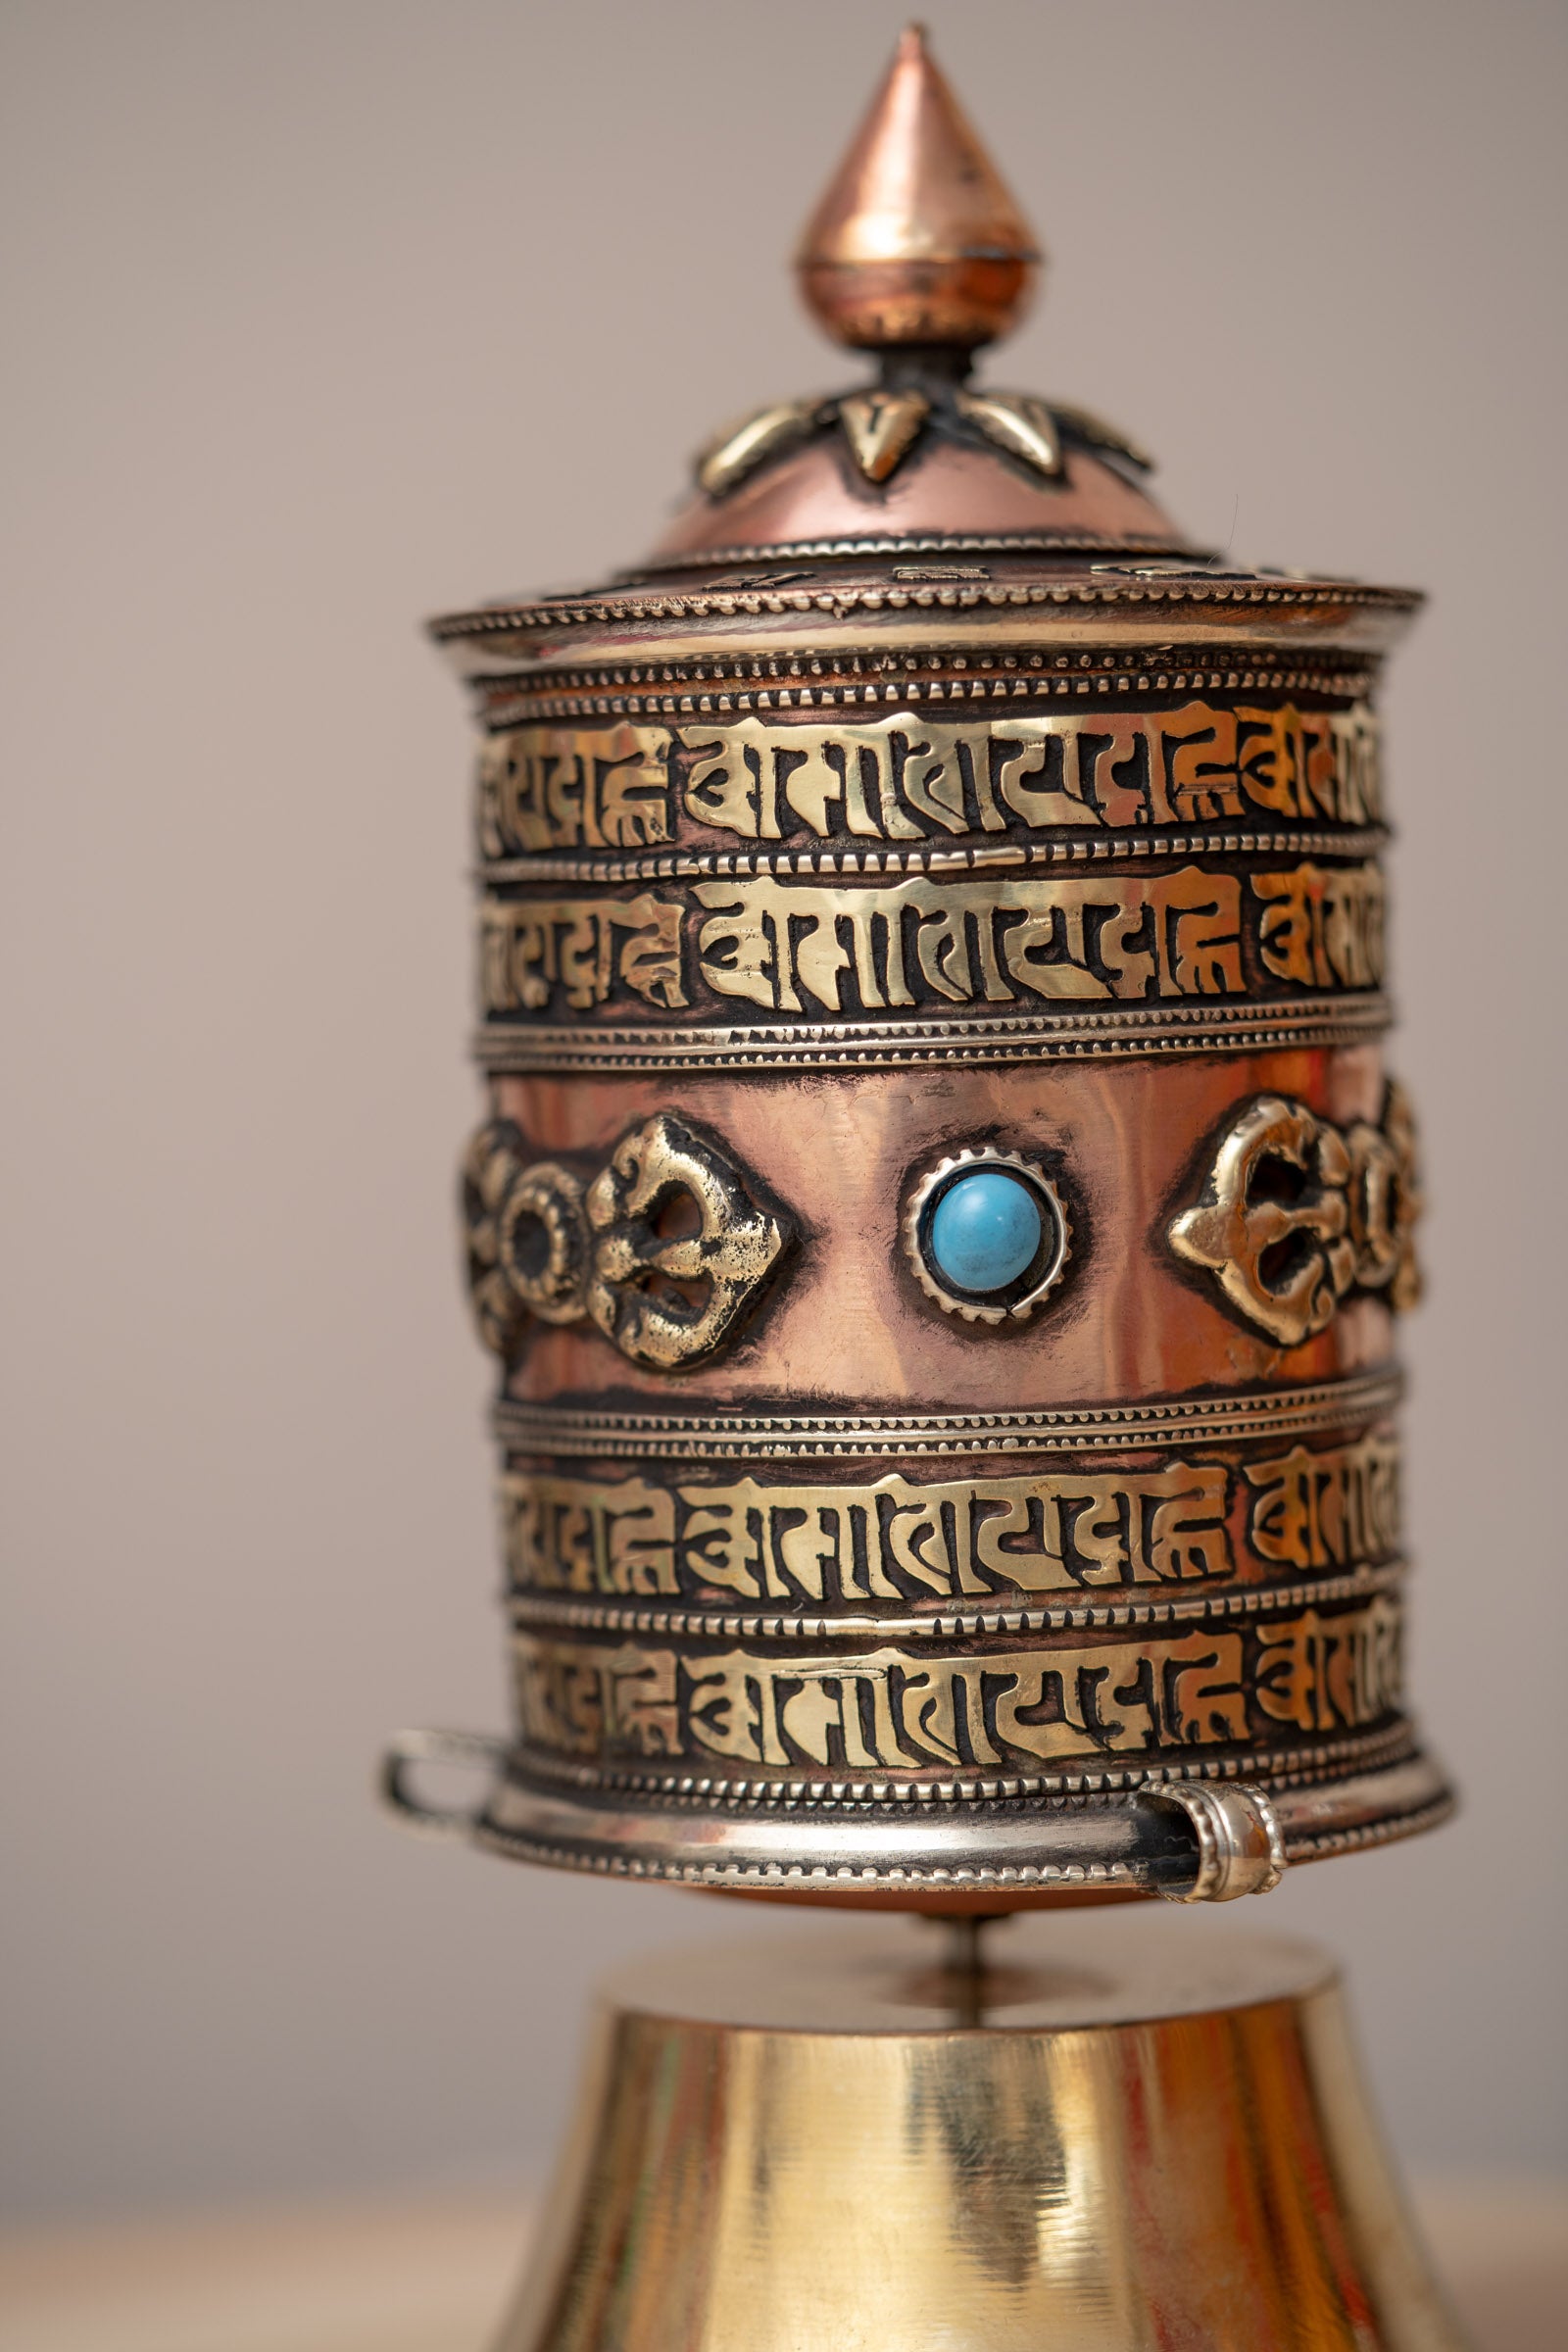  Bajra Prayer Wheel spreads positive energy, compassion, and blessings to all sentient beings.